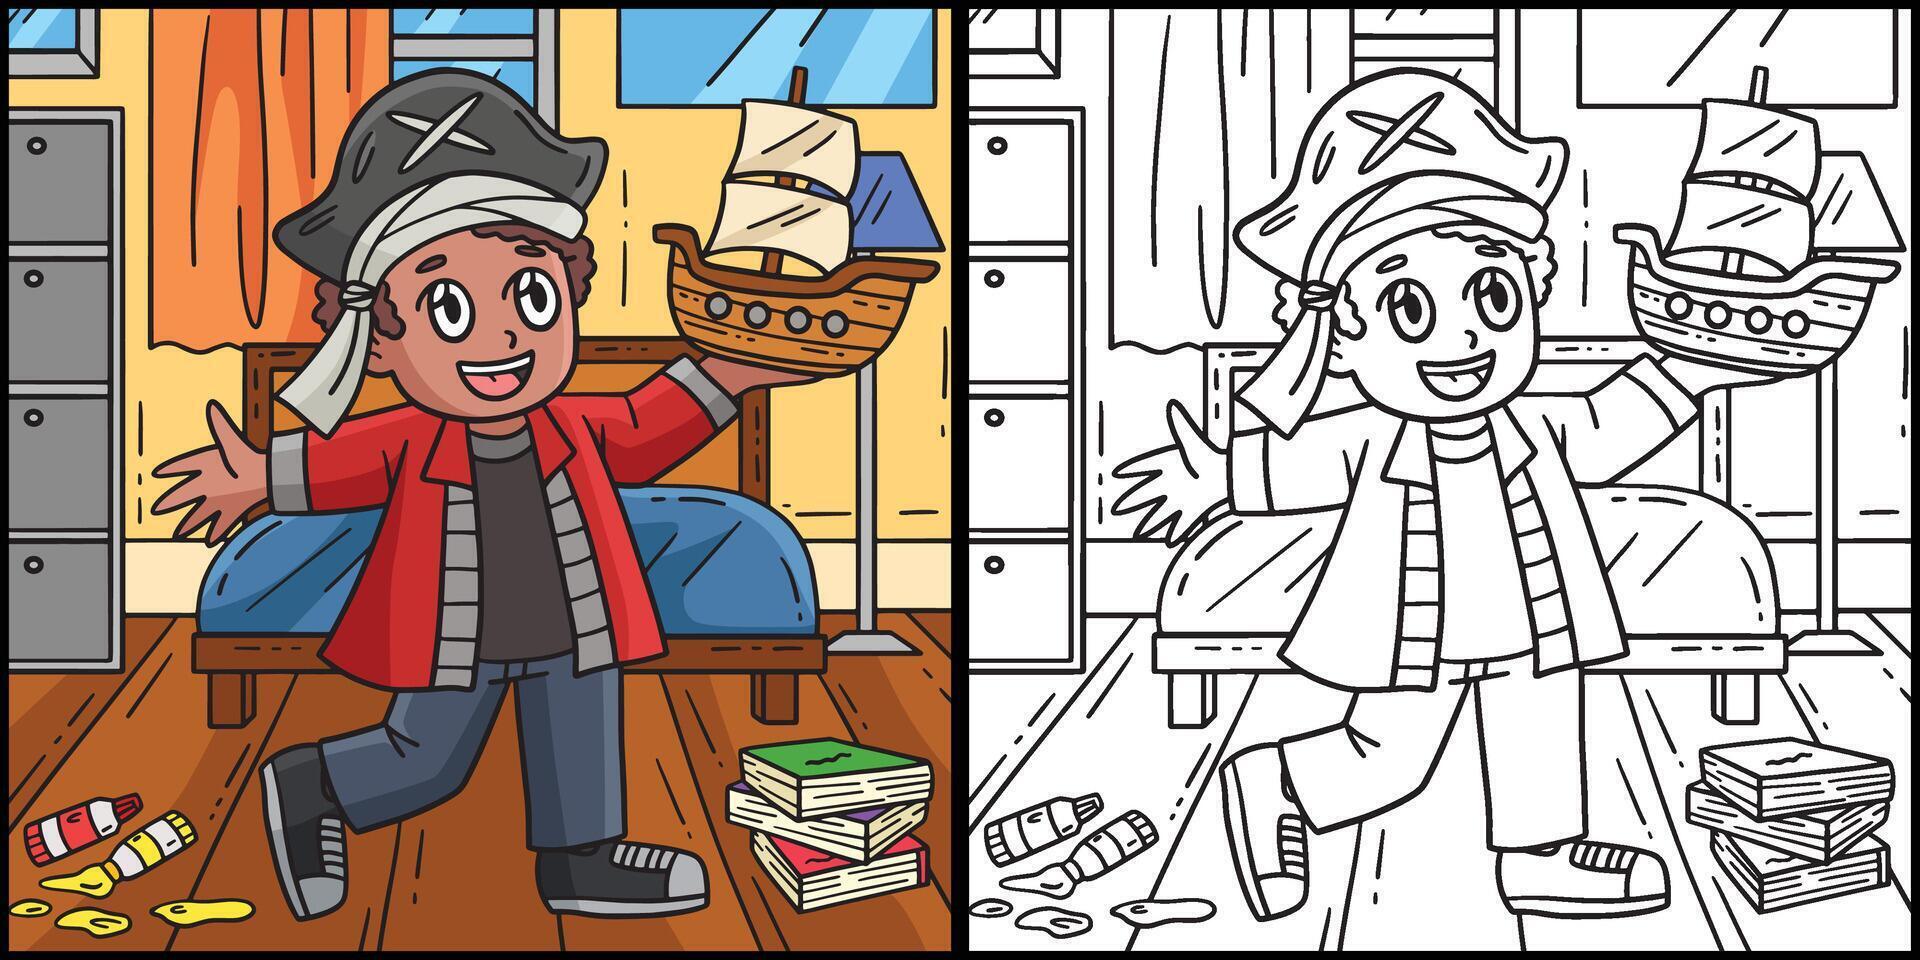 Child with Pirate Hat and Model Ship Illustration vector